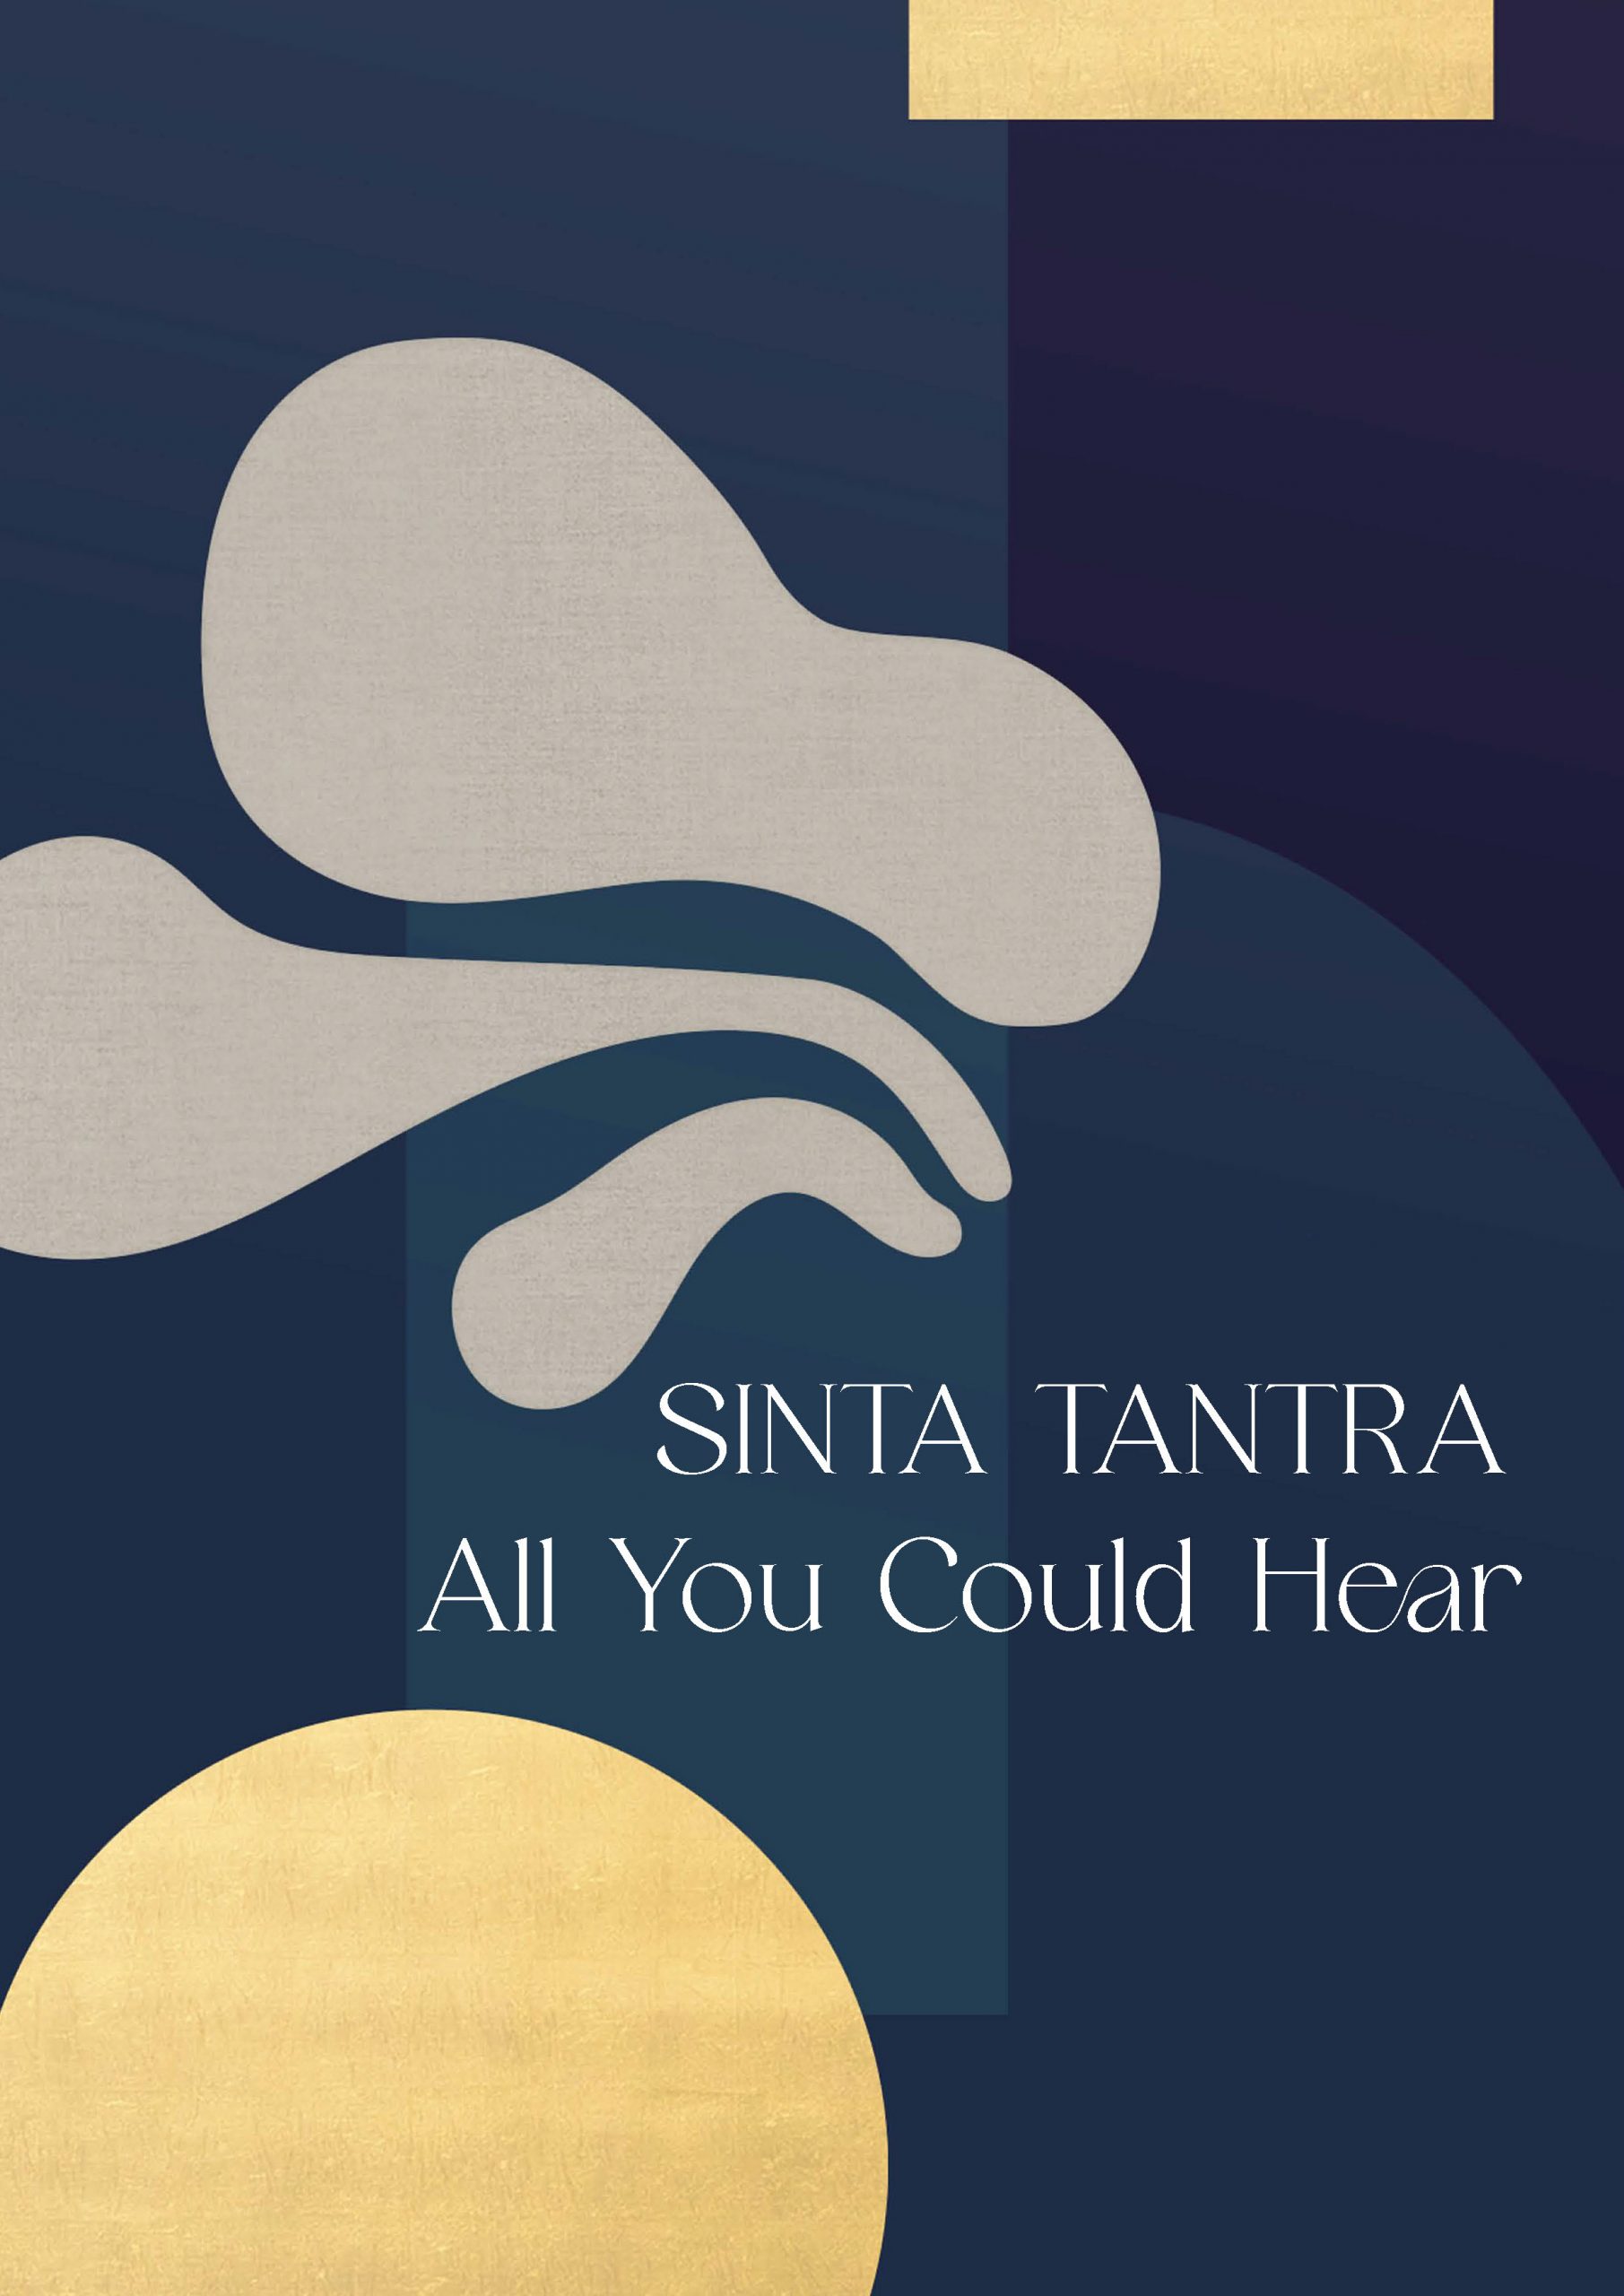 Sinta Tantra – All You Could Hear